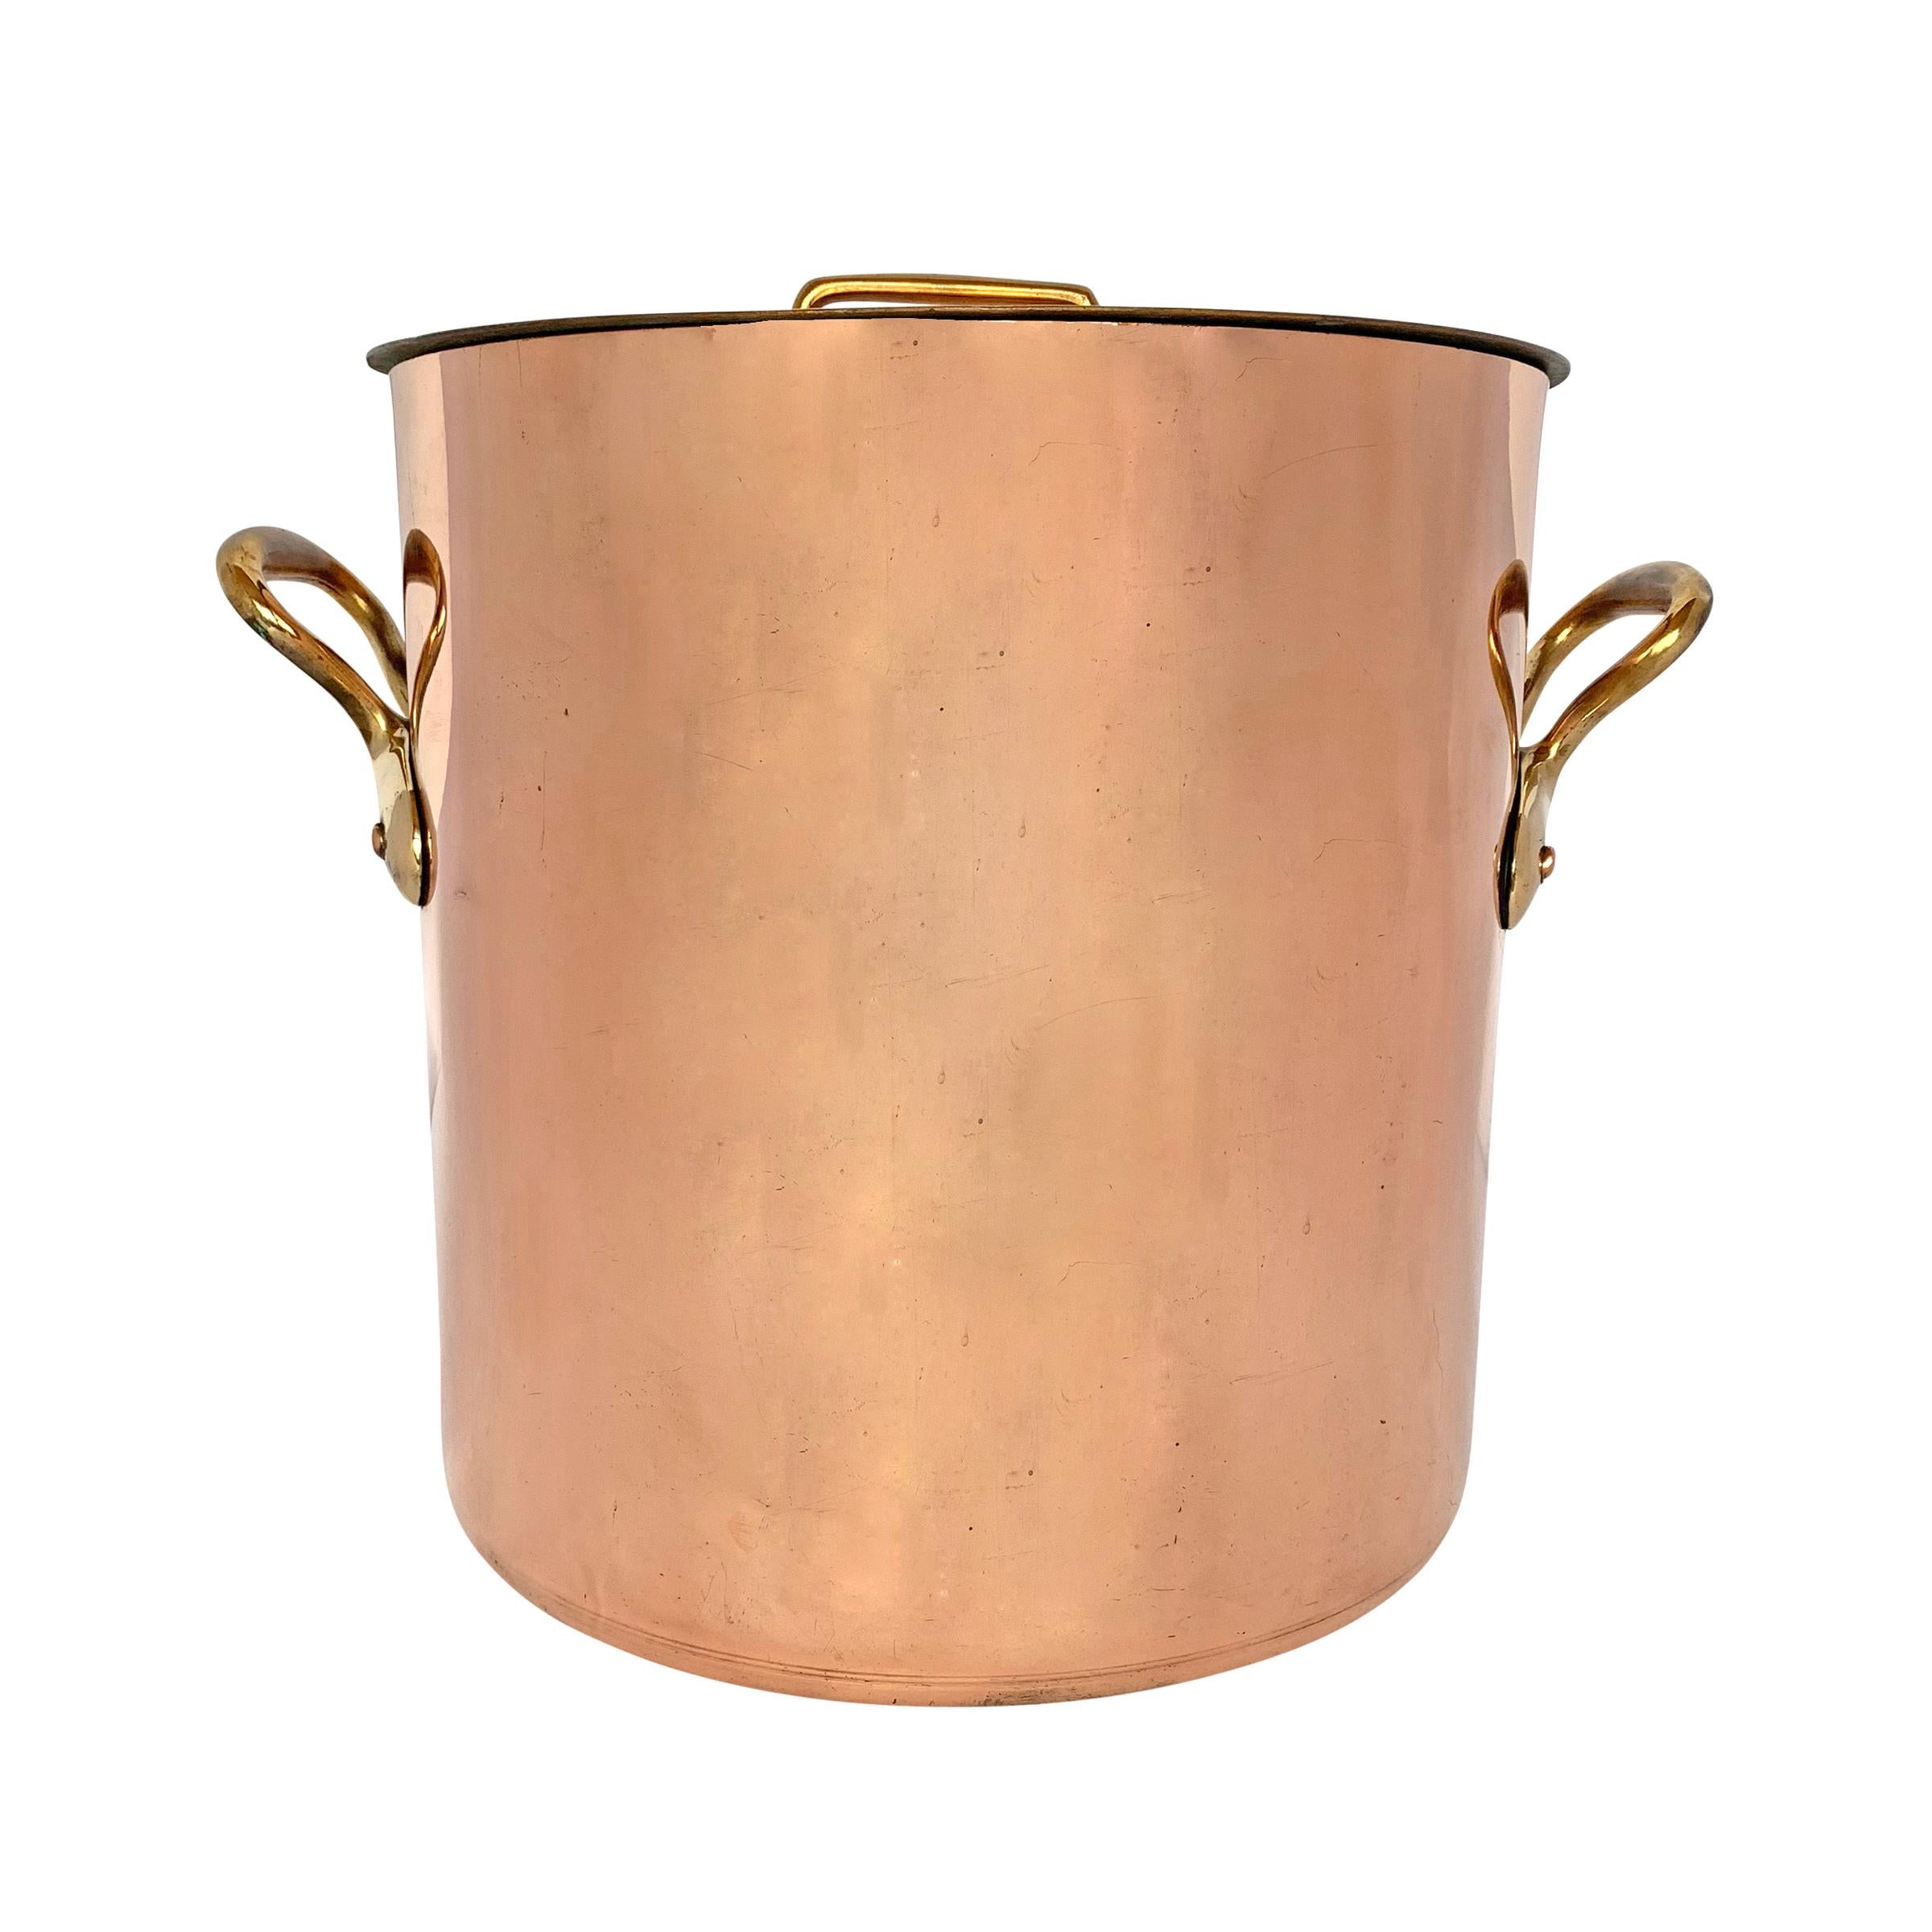 A fantastic large 28 quart, 1.5 mm thick, 19th century French copper stock pot with lid, both parts with heavy bronze handles. Both lid and pot are stamped with a 